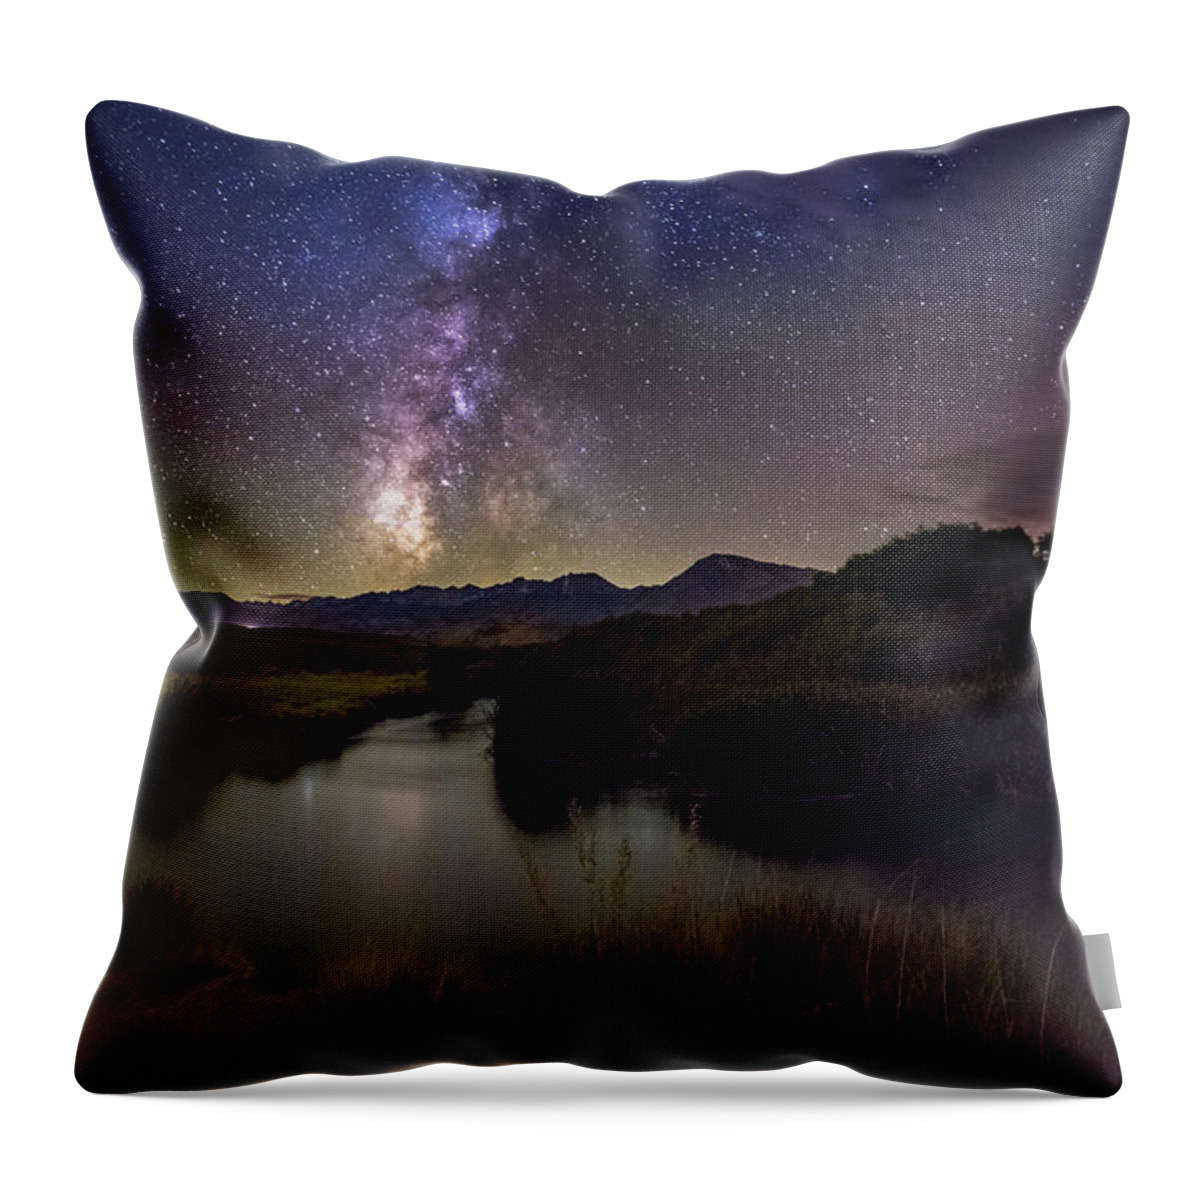 Milkyway Throw Pillow featuring the photograph River Bend by Tassanee Angiolillo